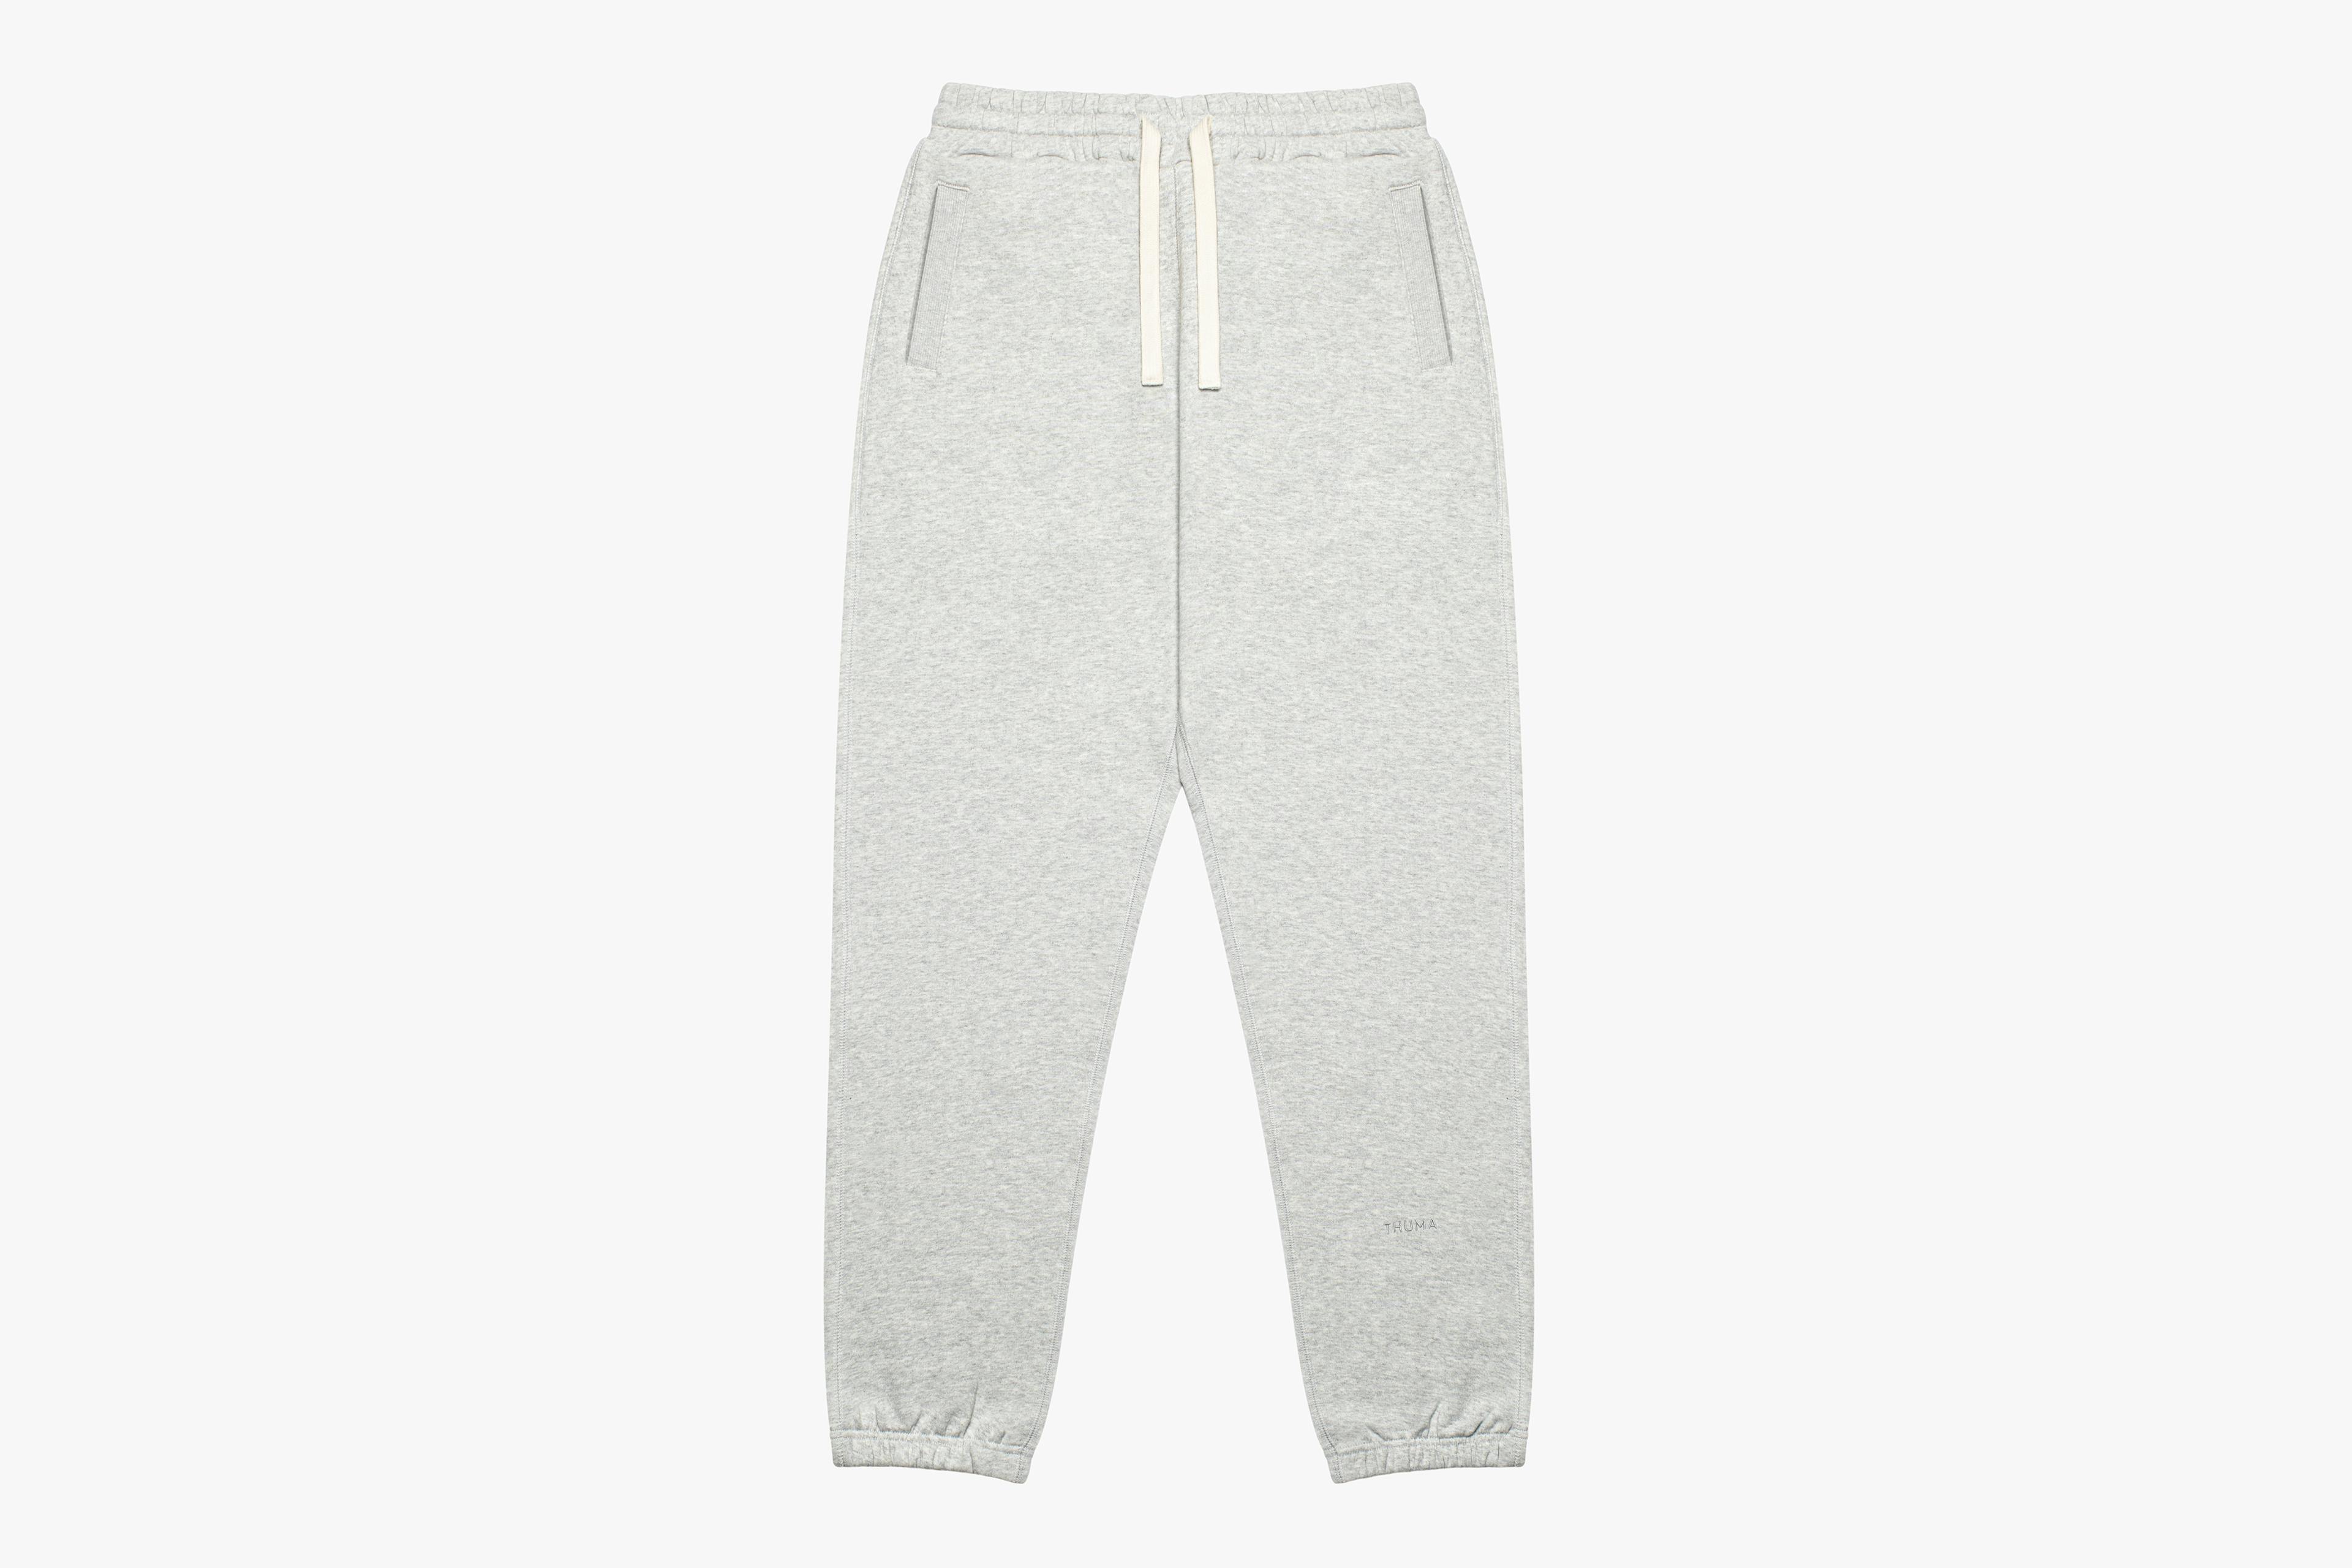 Lound Leisure Sweatpants in Grey for Women